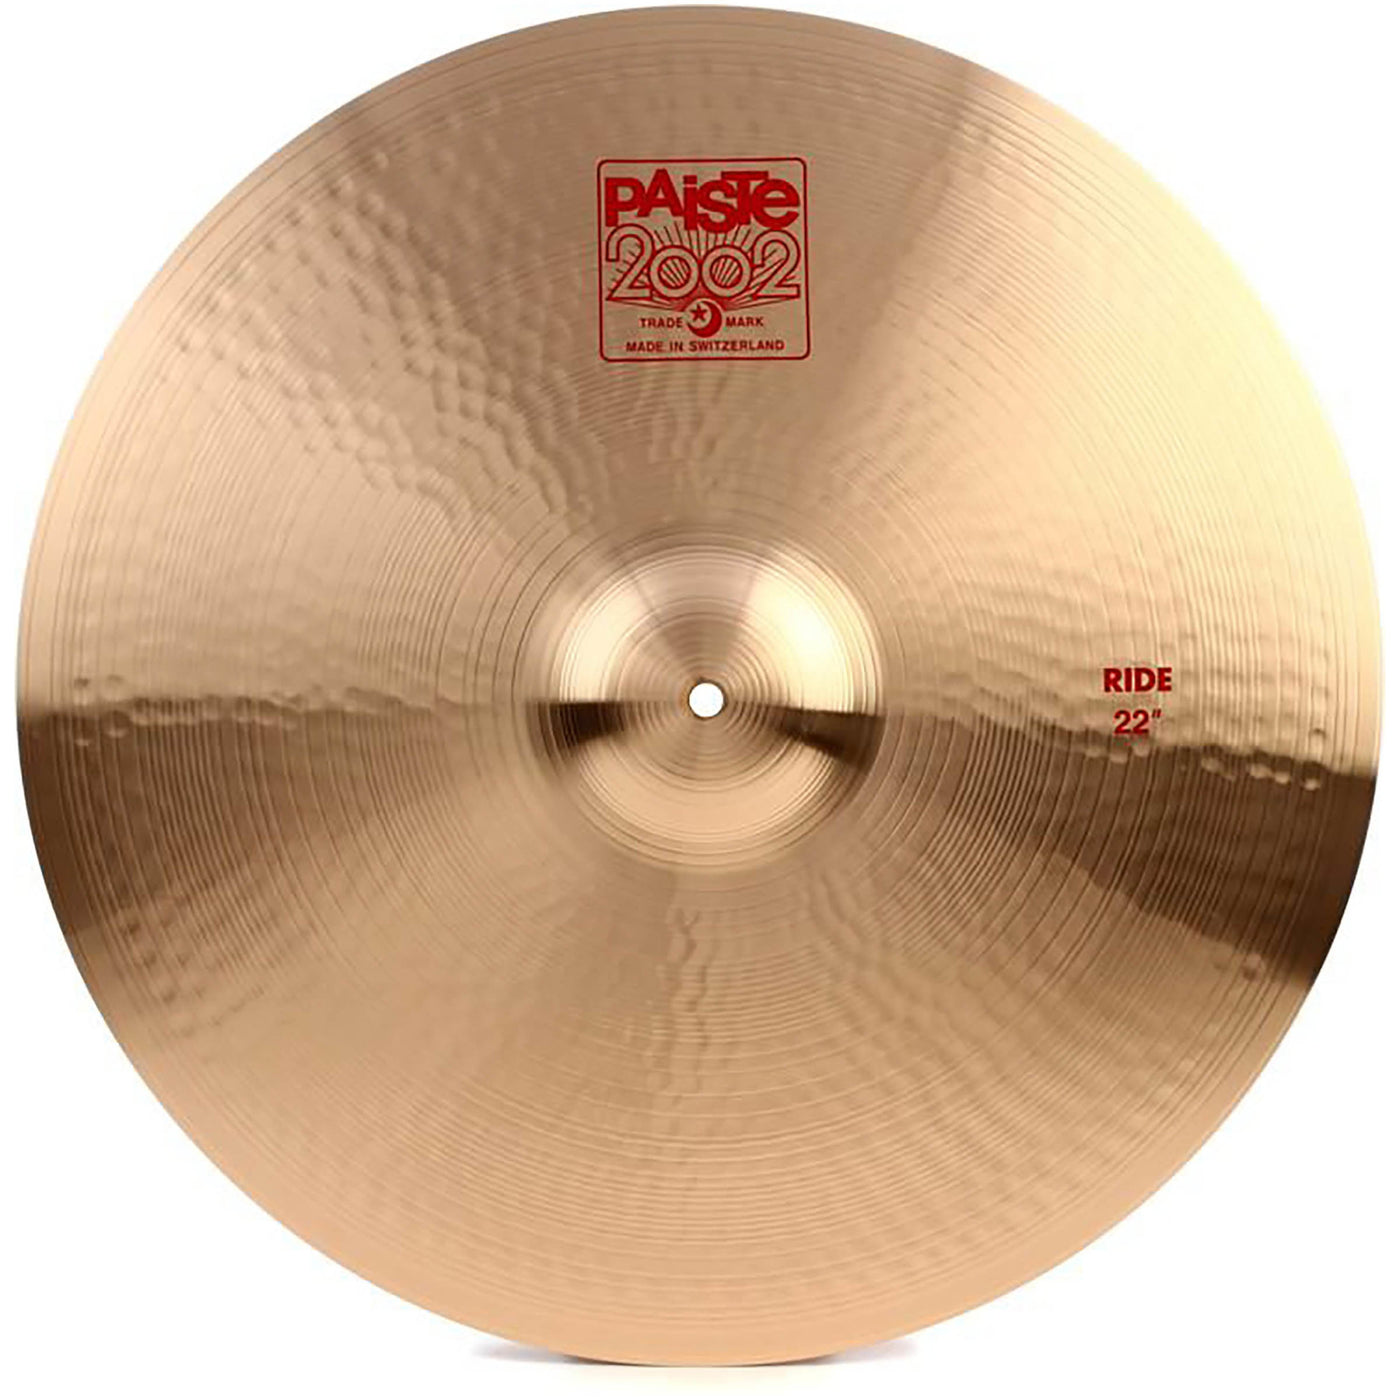 Paiste 1061622 Ride Cymbal, 2002 Series, Percussion Instrument for Drums, 22"